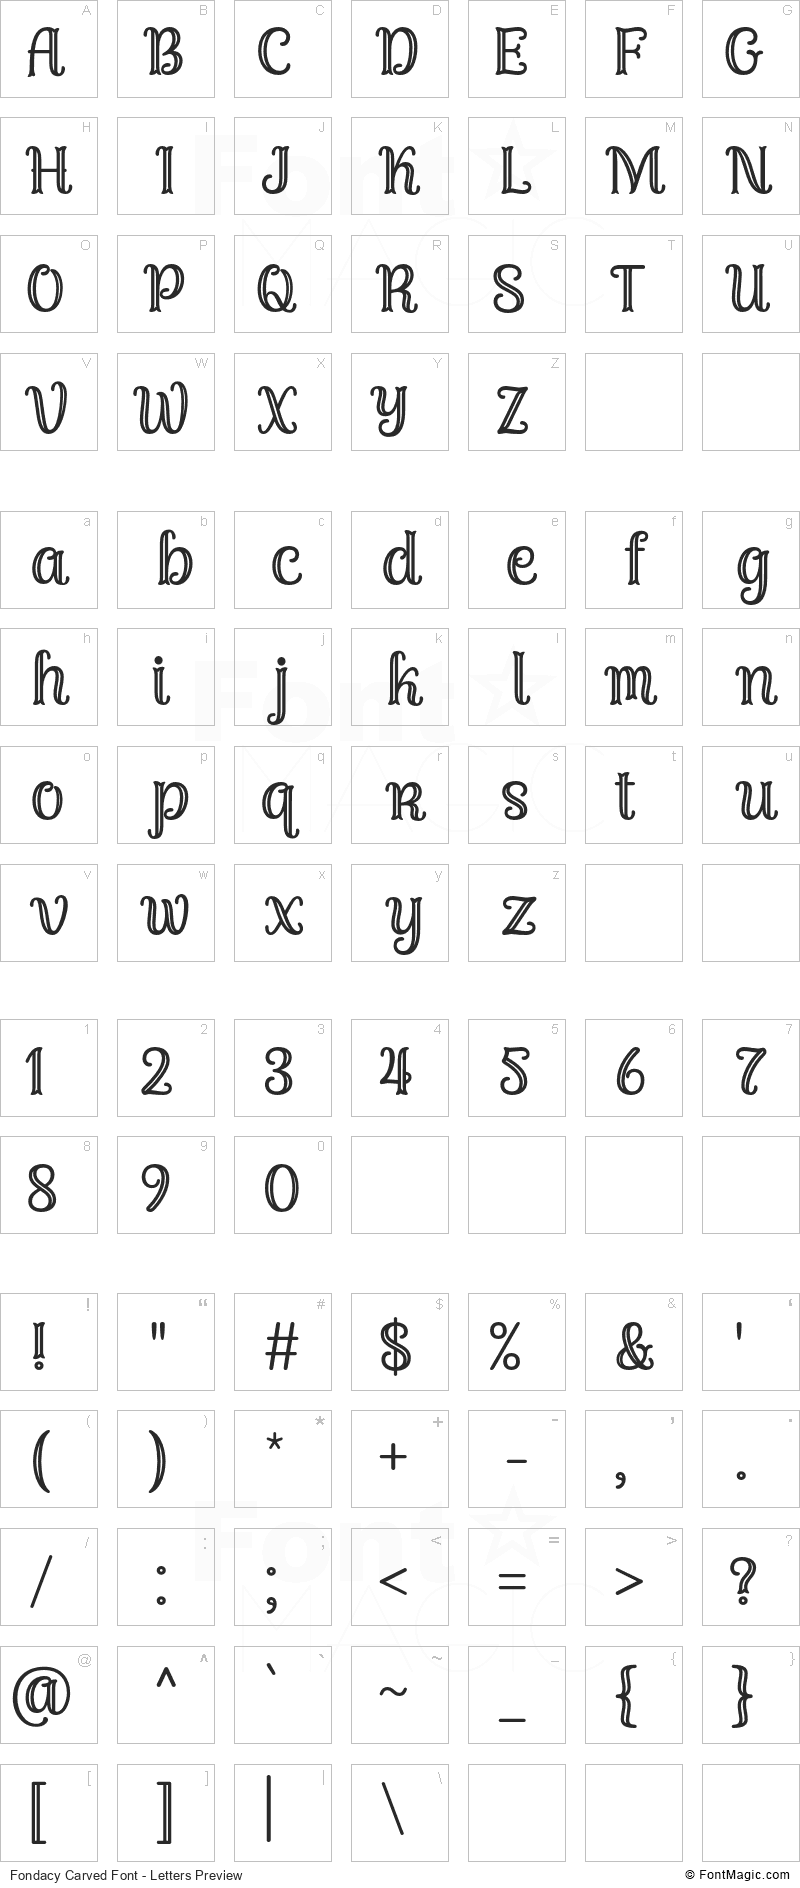 Fondacy Carved Font - All Latters Preview Chart